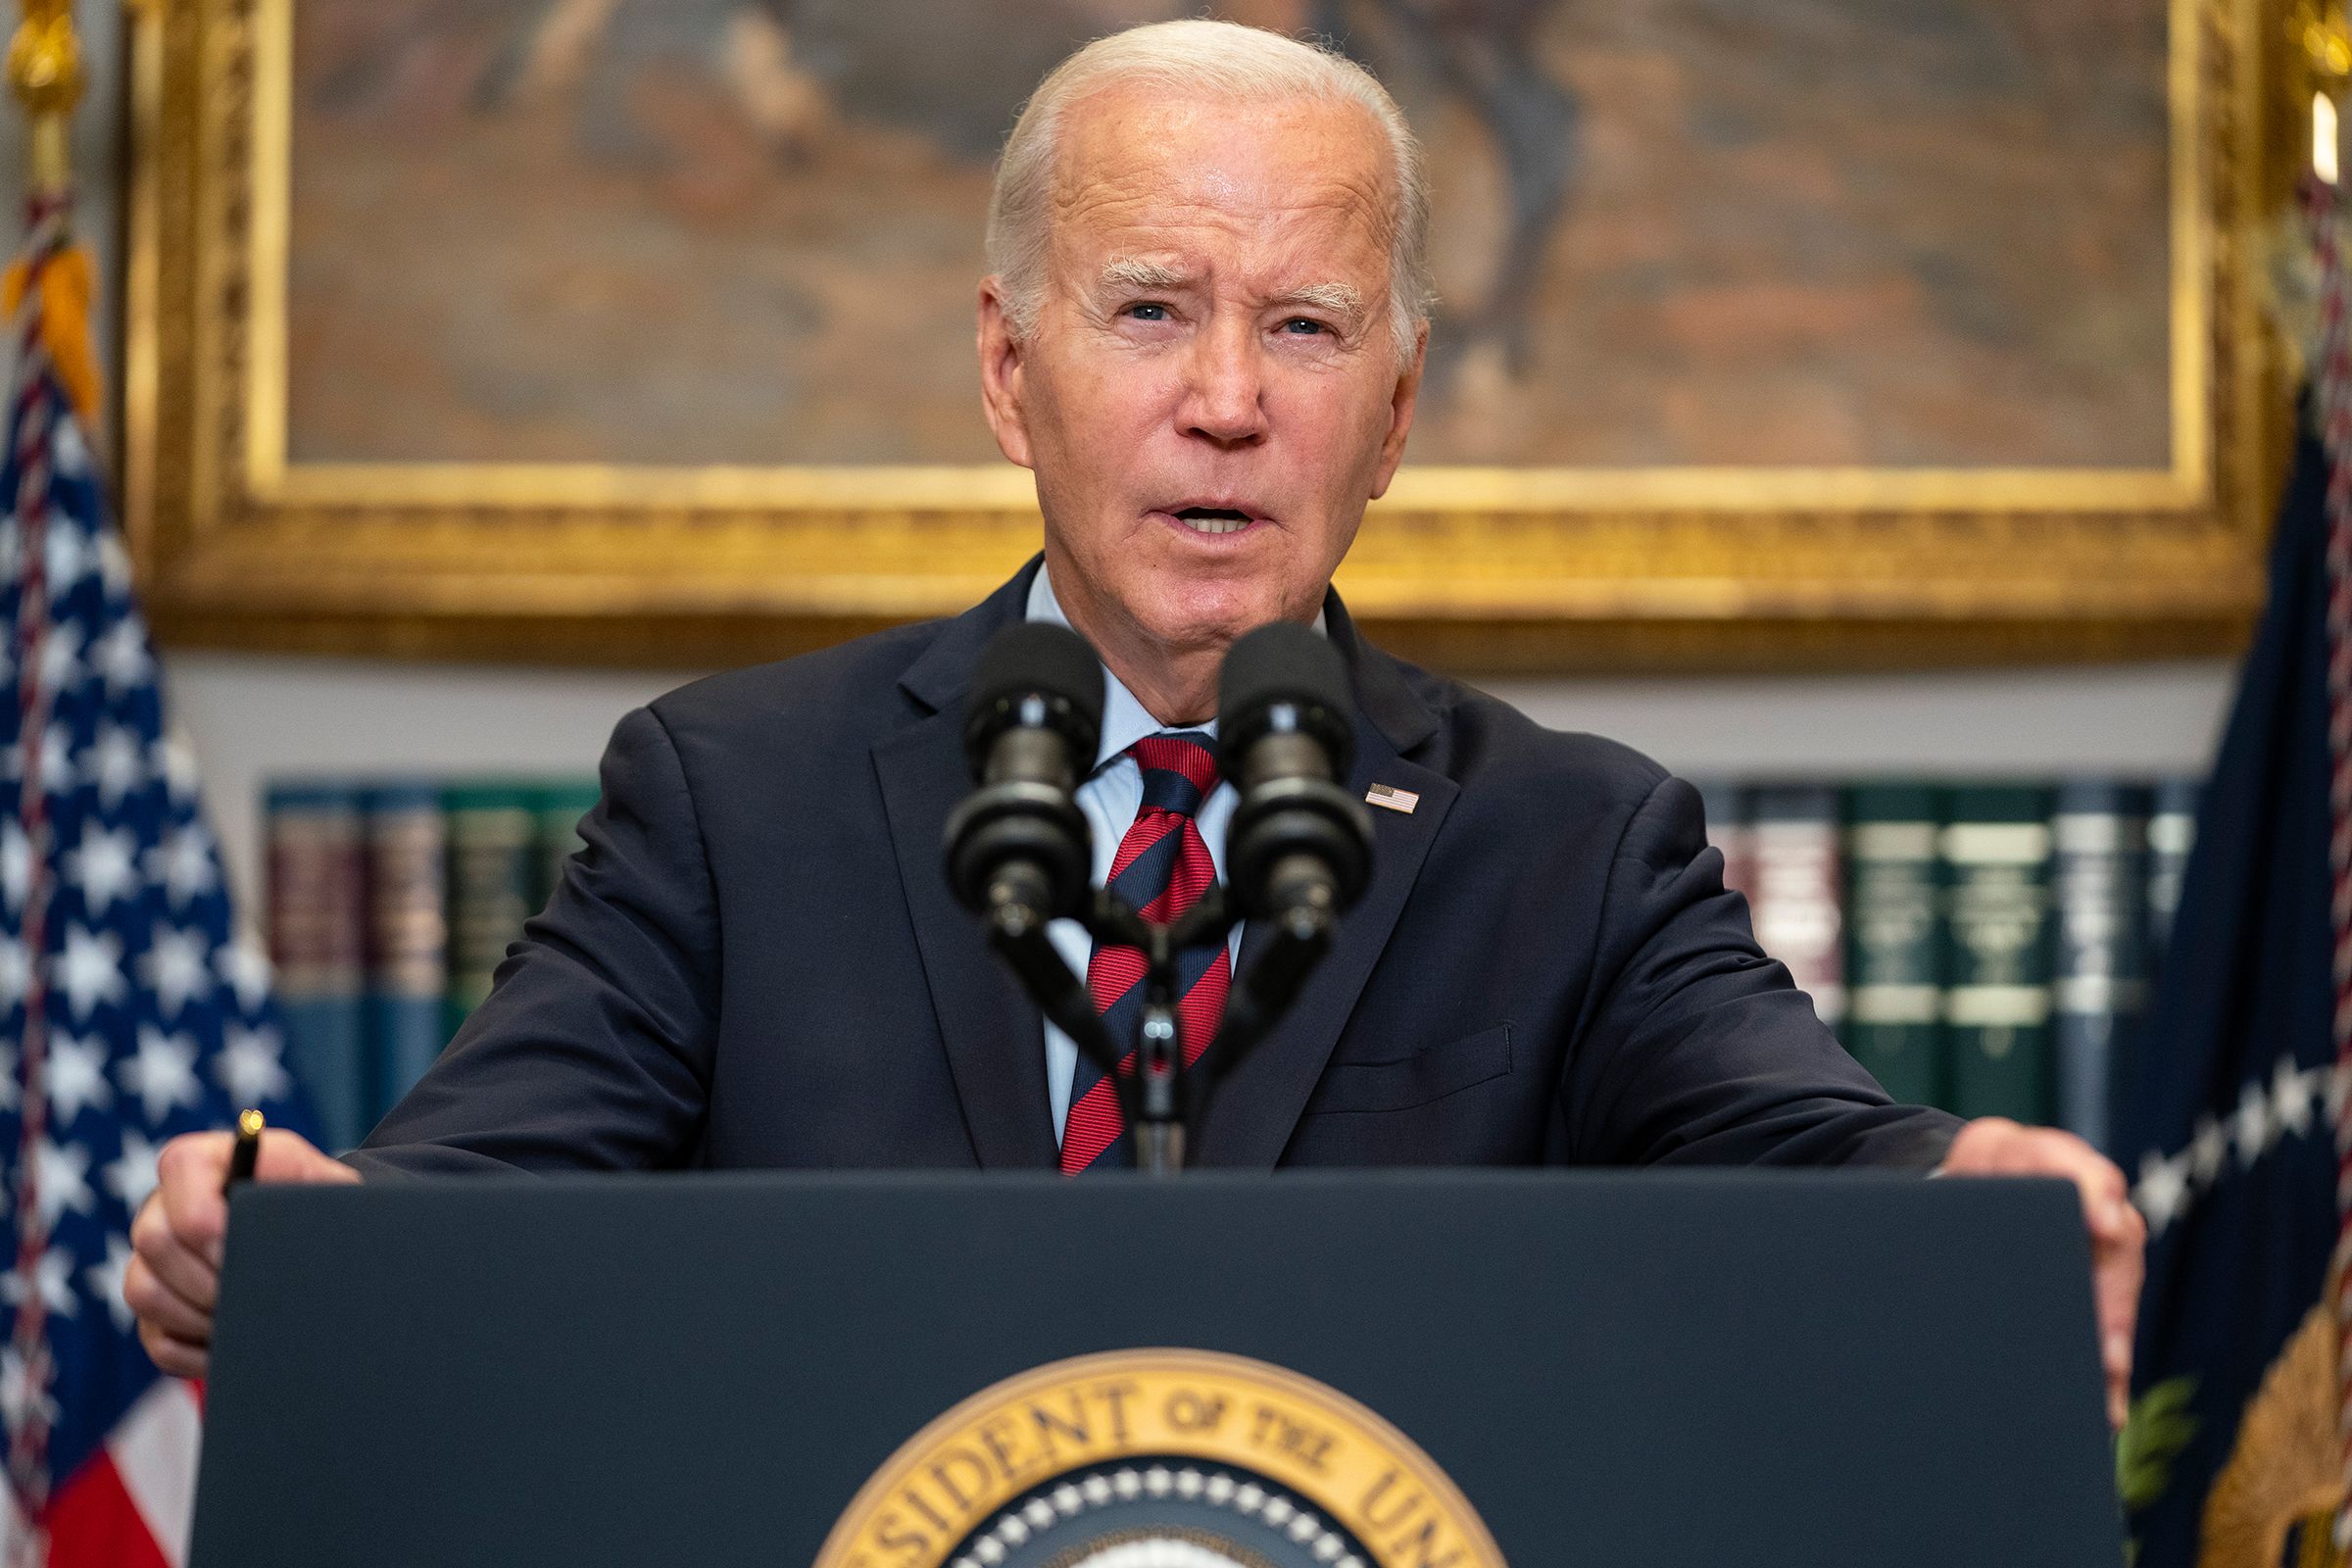 New Clash Over Student Loans: States Sue Over Biden’s Easy Forgiveness Plan